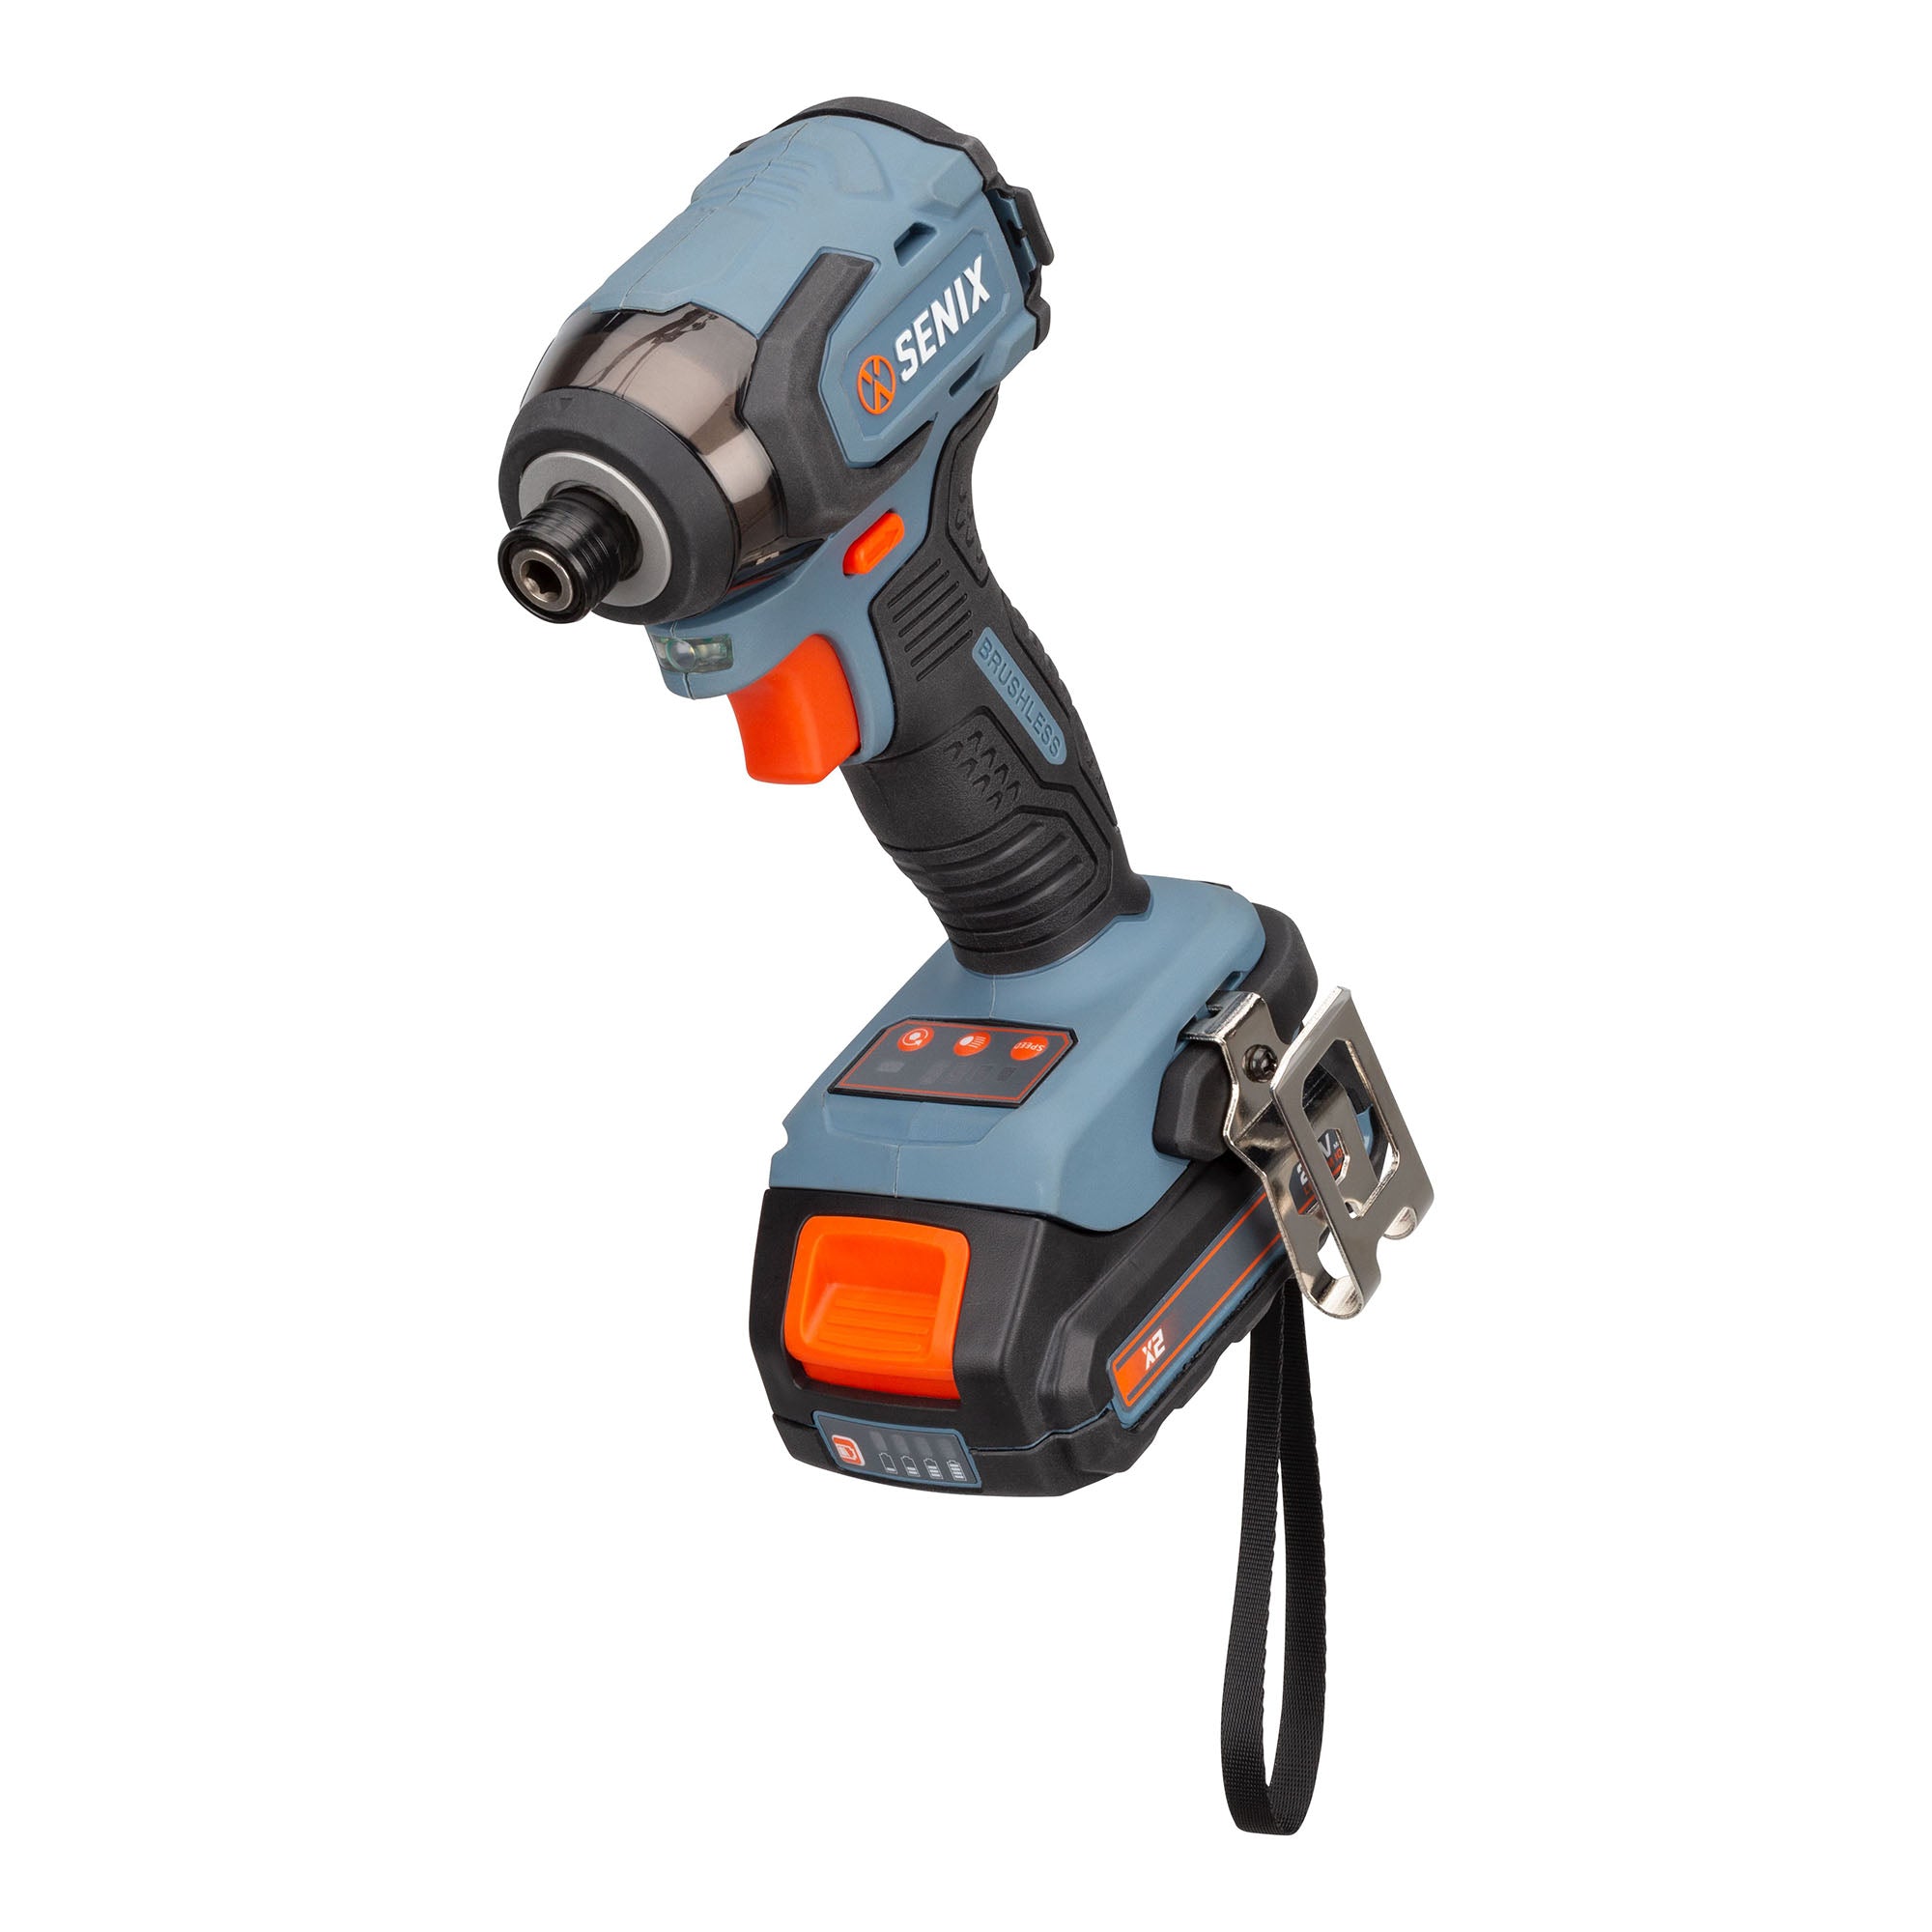 Senix 20 Volt MAX* Brushless 1/2-Inch Hammer Drill Driver, 2 Ah Battery, 2A Charger and Soft Bag Included, Pdhx2-m2, Blue